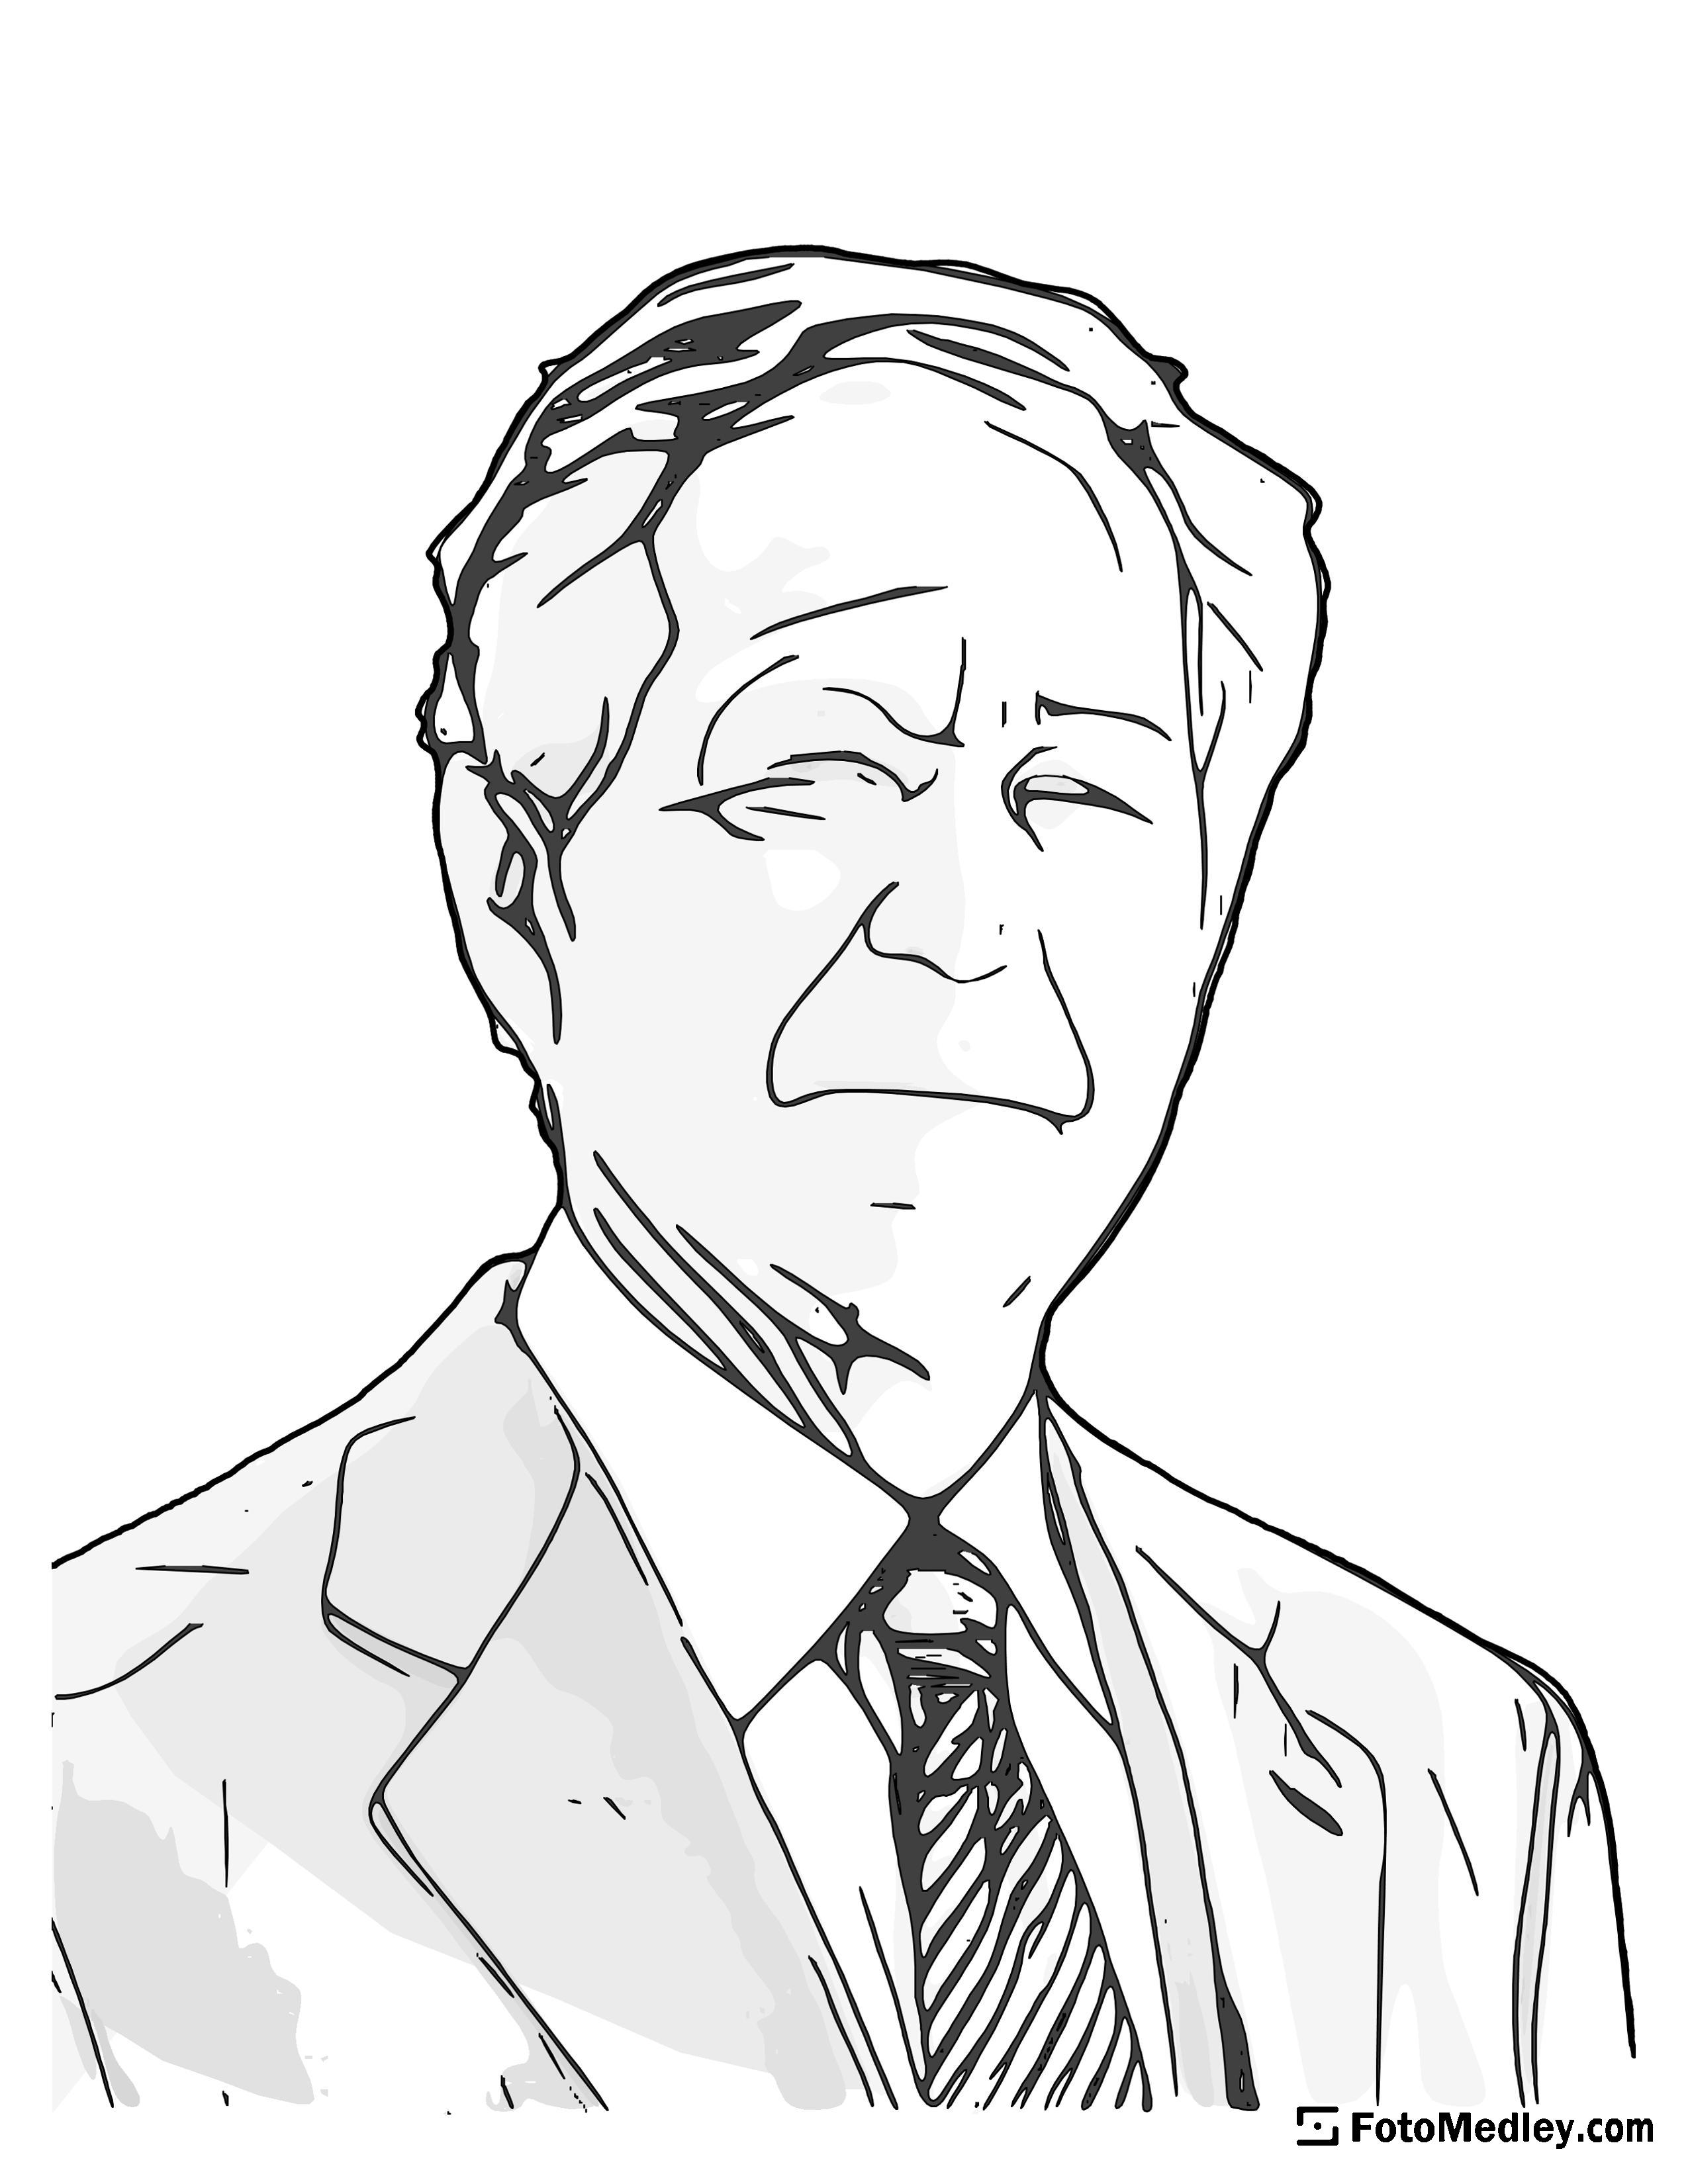 A cartoon style coloring sketch of George W. Bush, 43rd President of the United States.